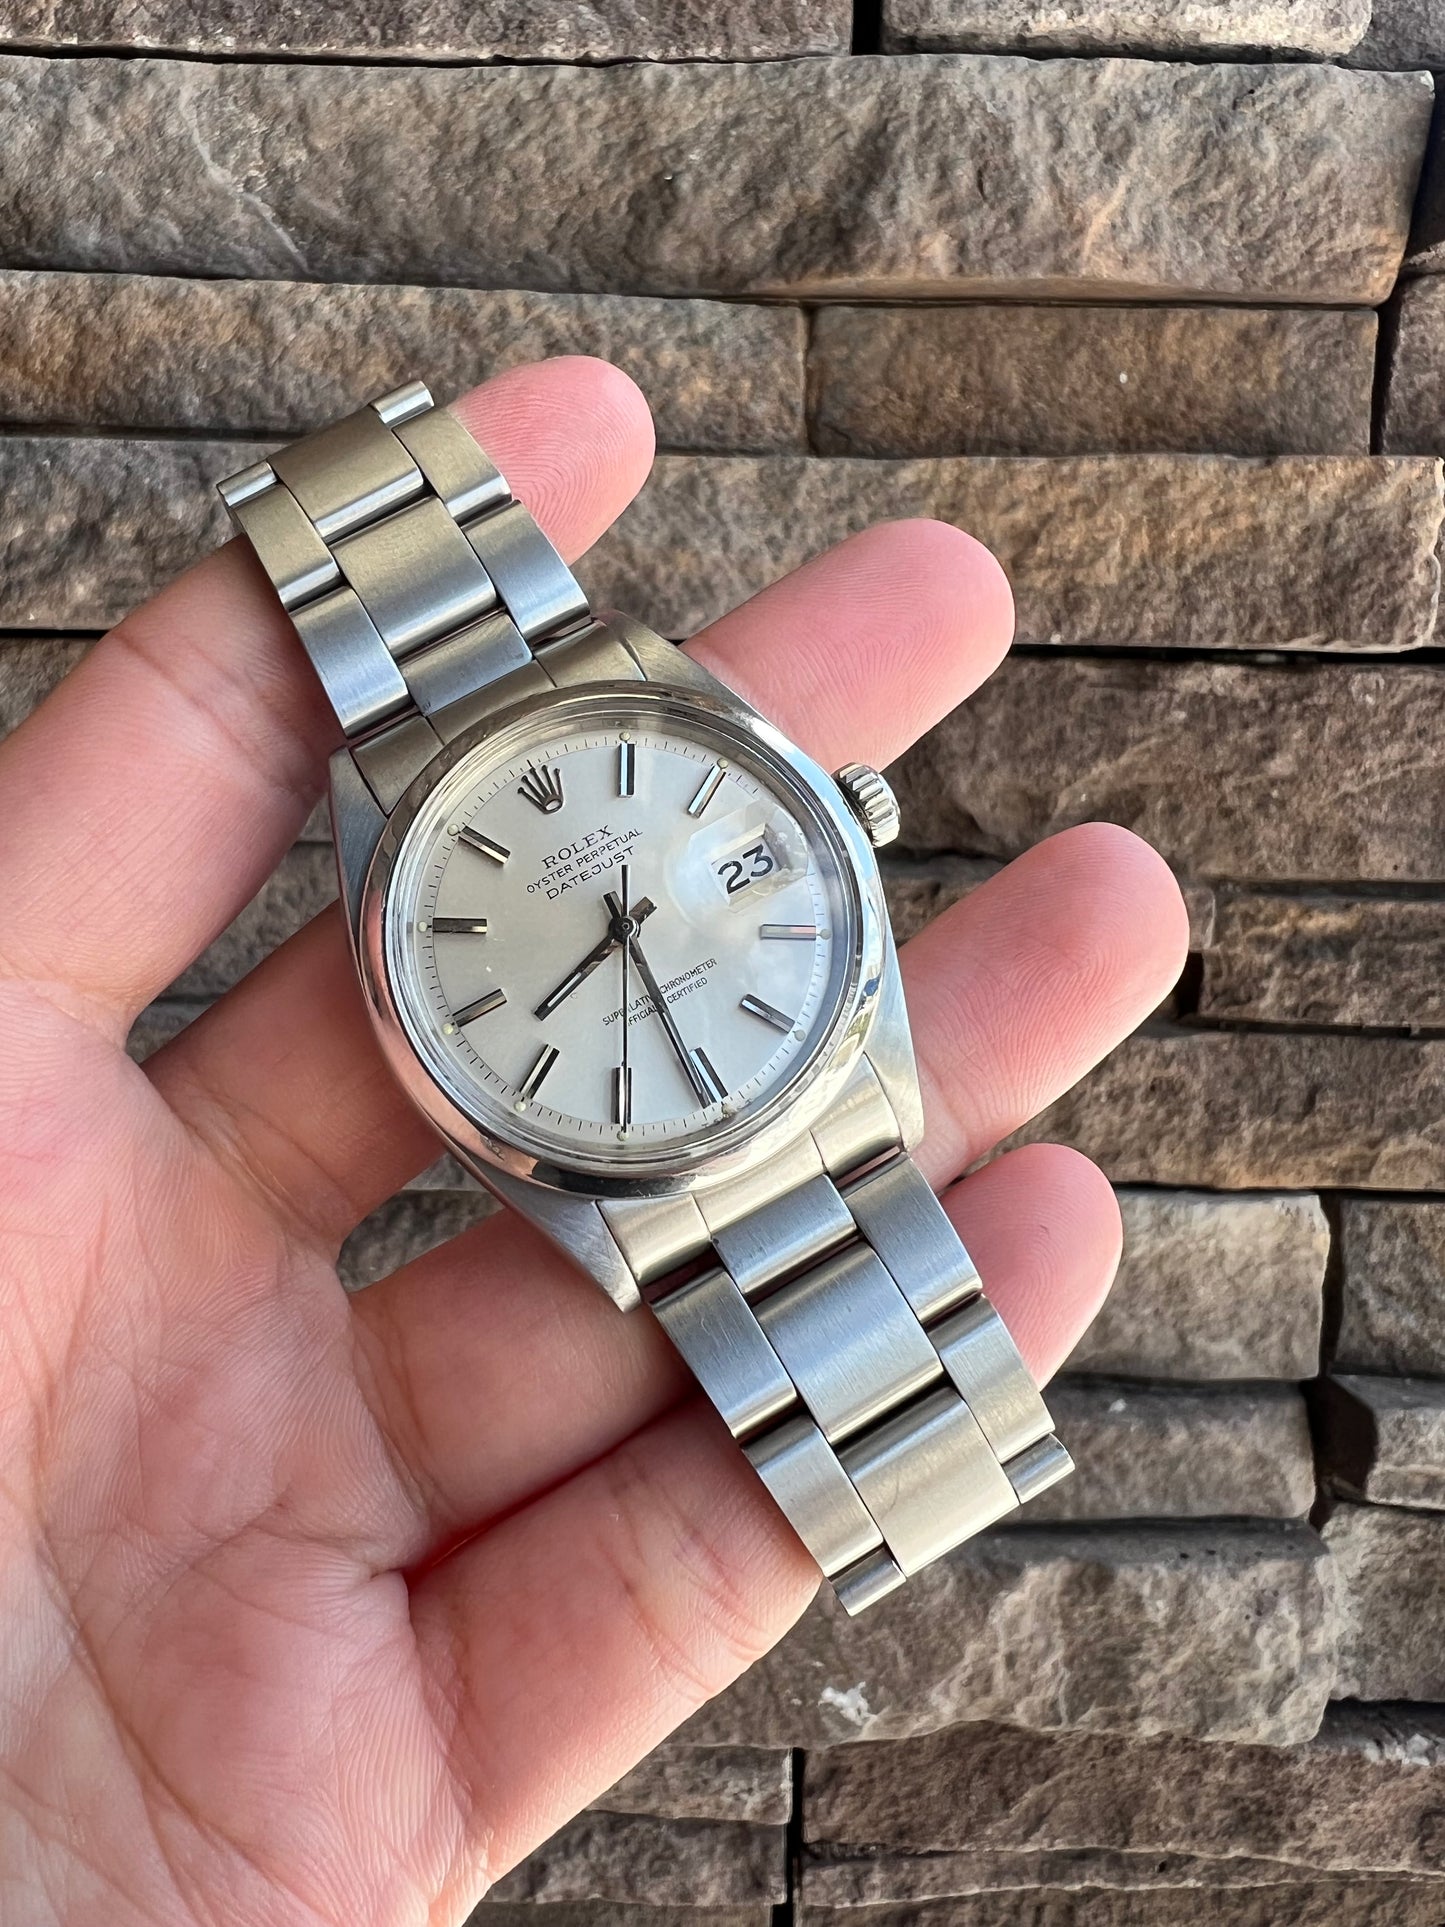 1603 Rolex Datejust with Smooth Bezel